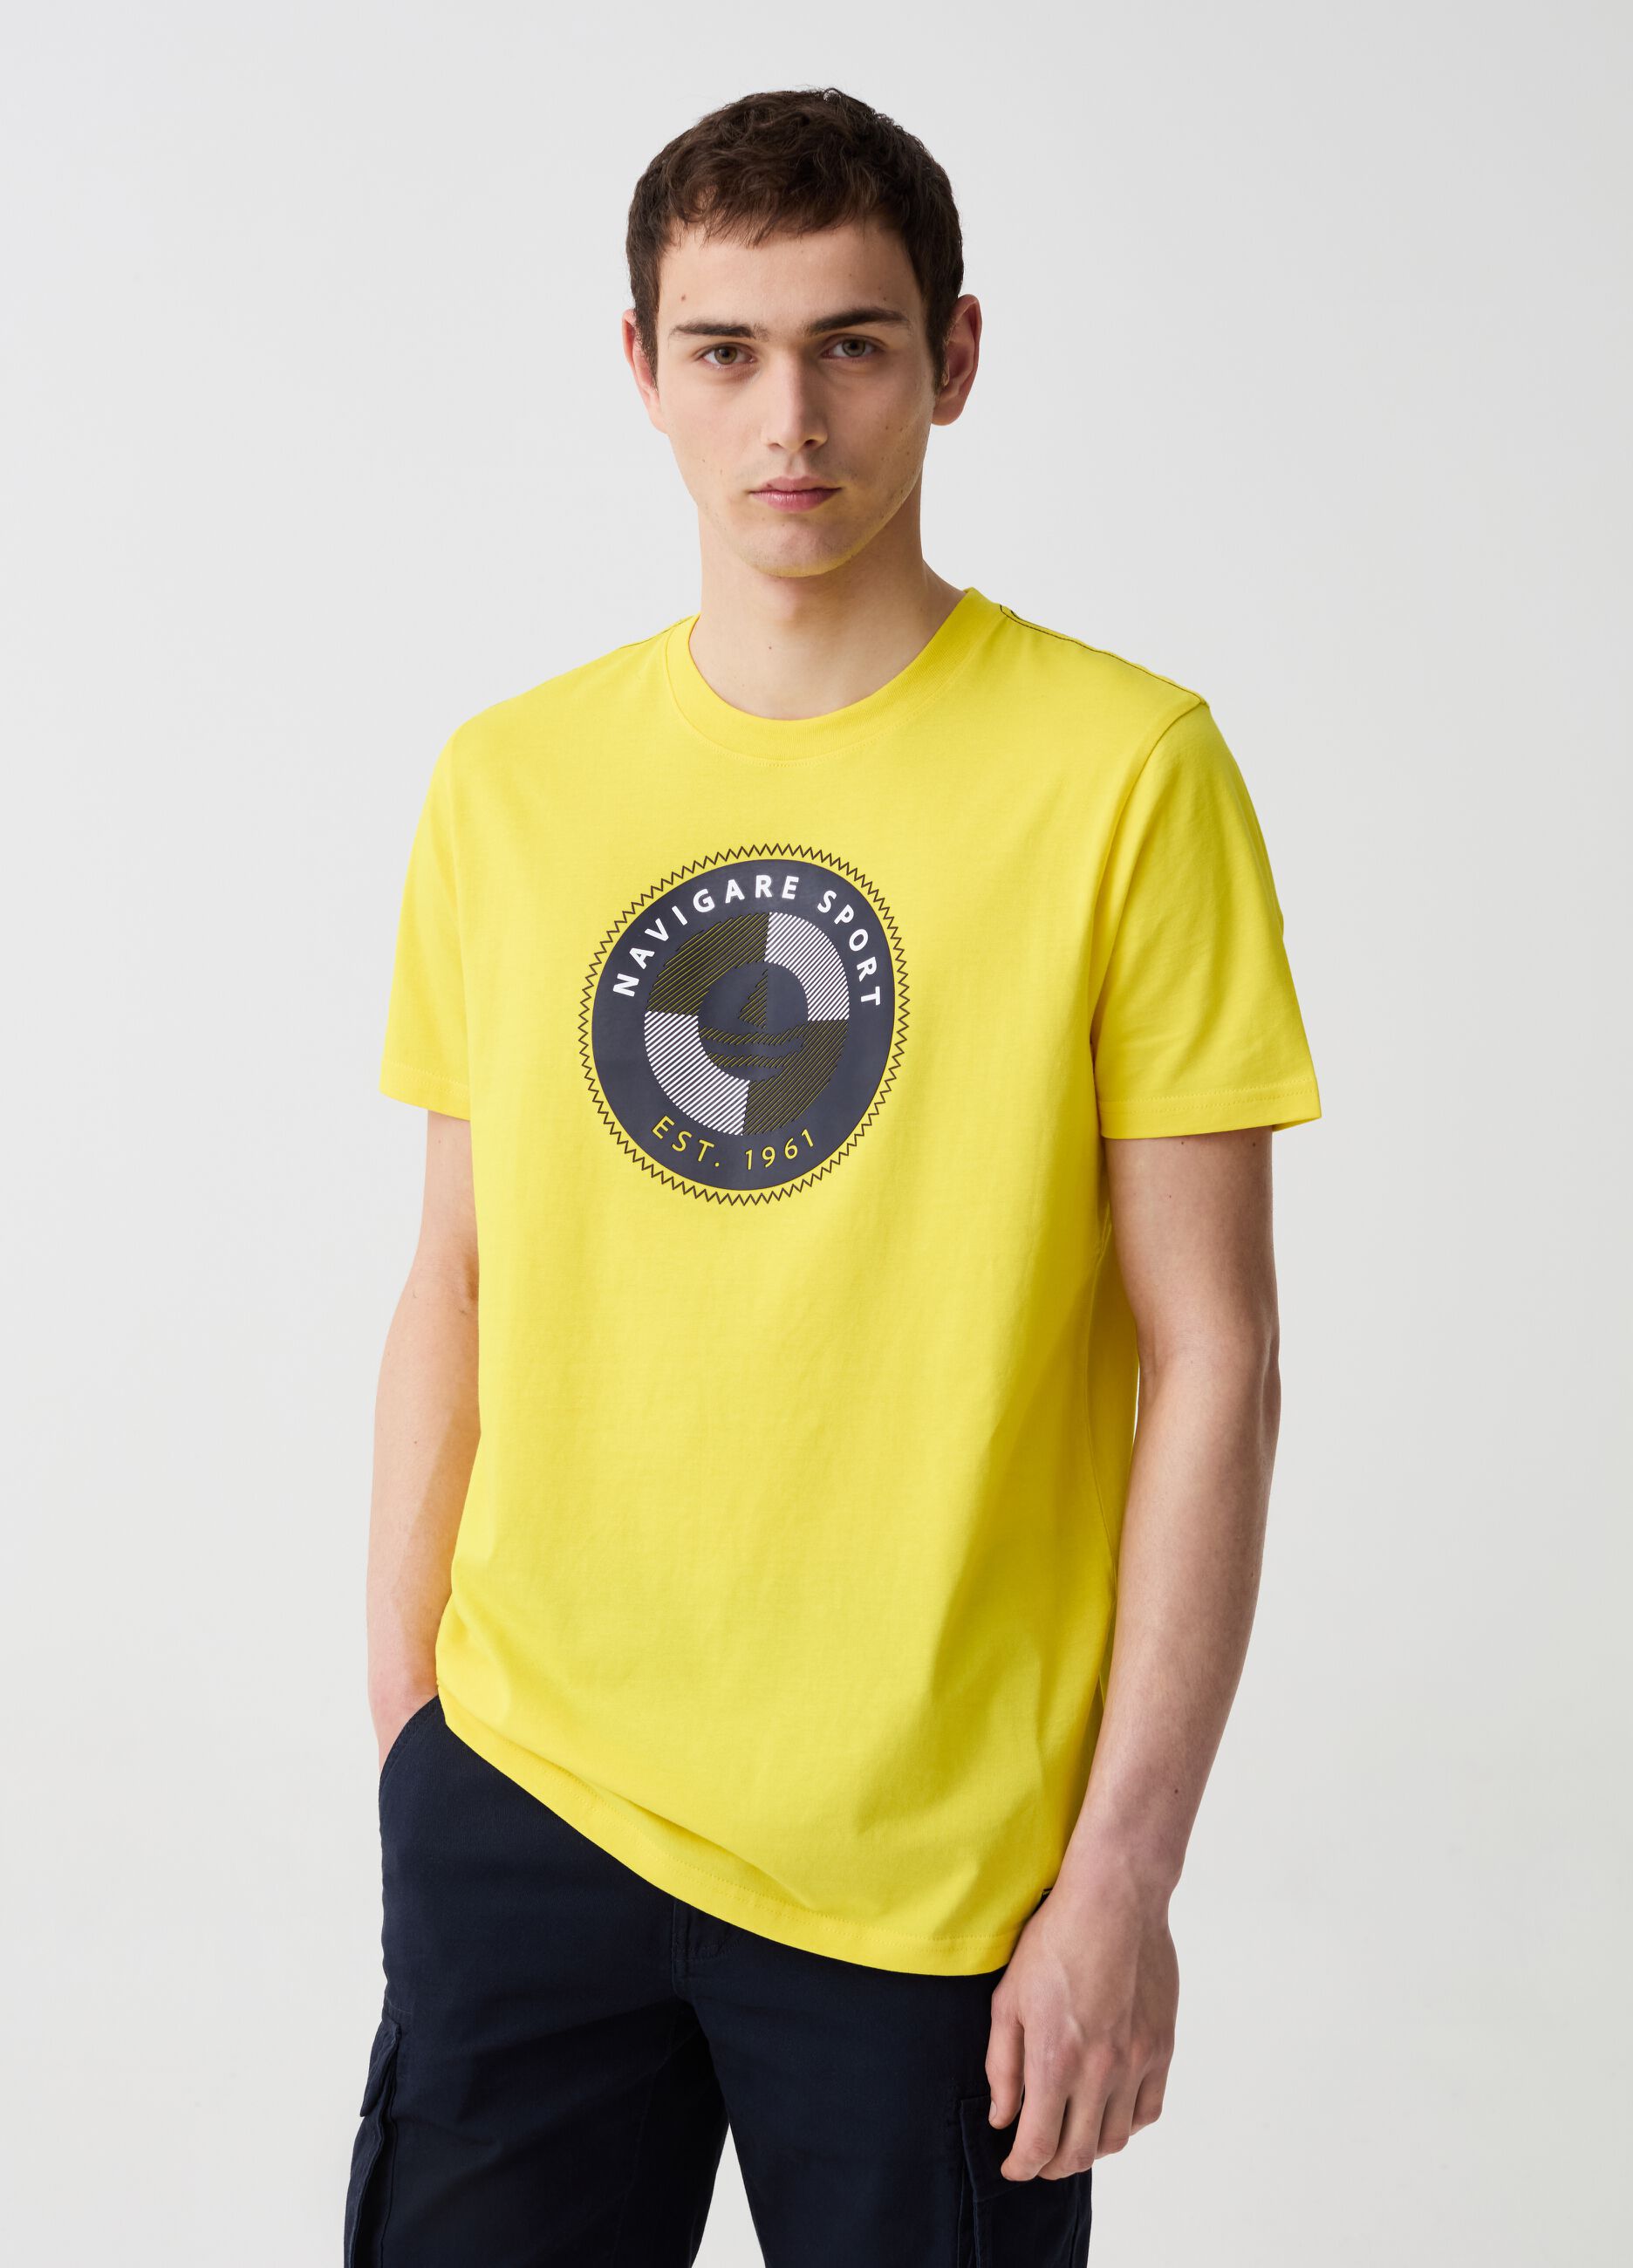 T-shirt con stampa logo Navigare Sport